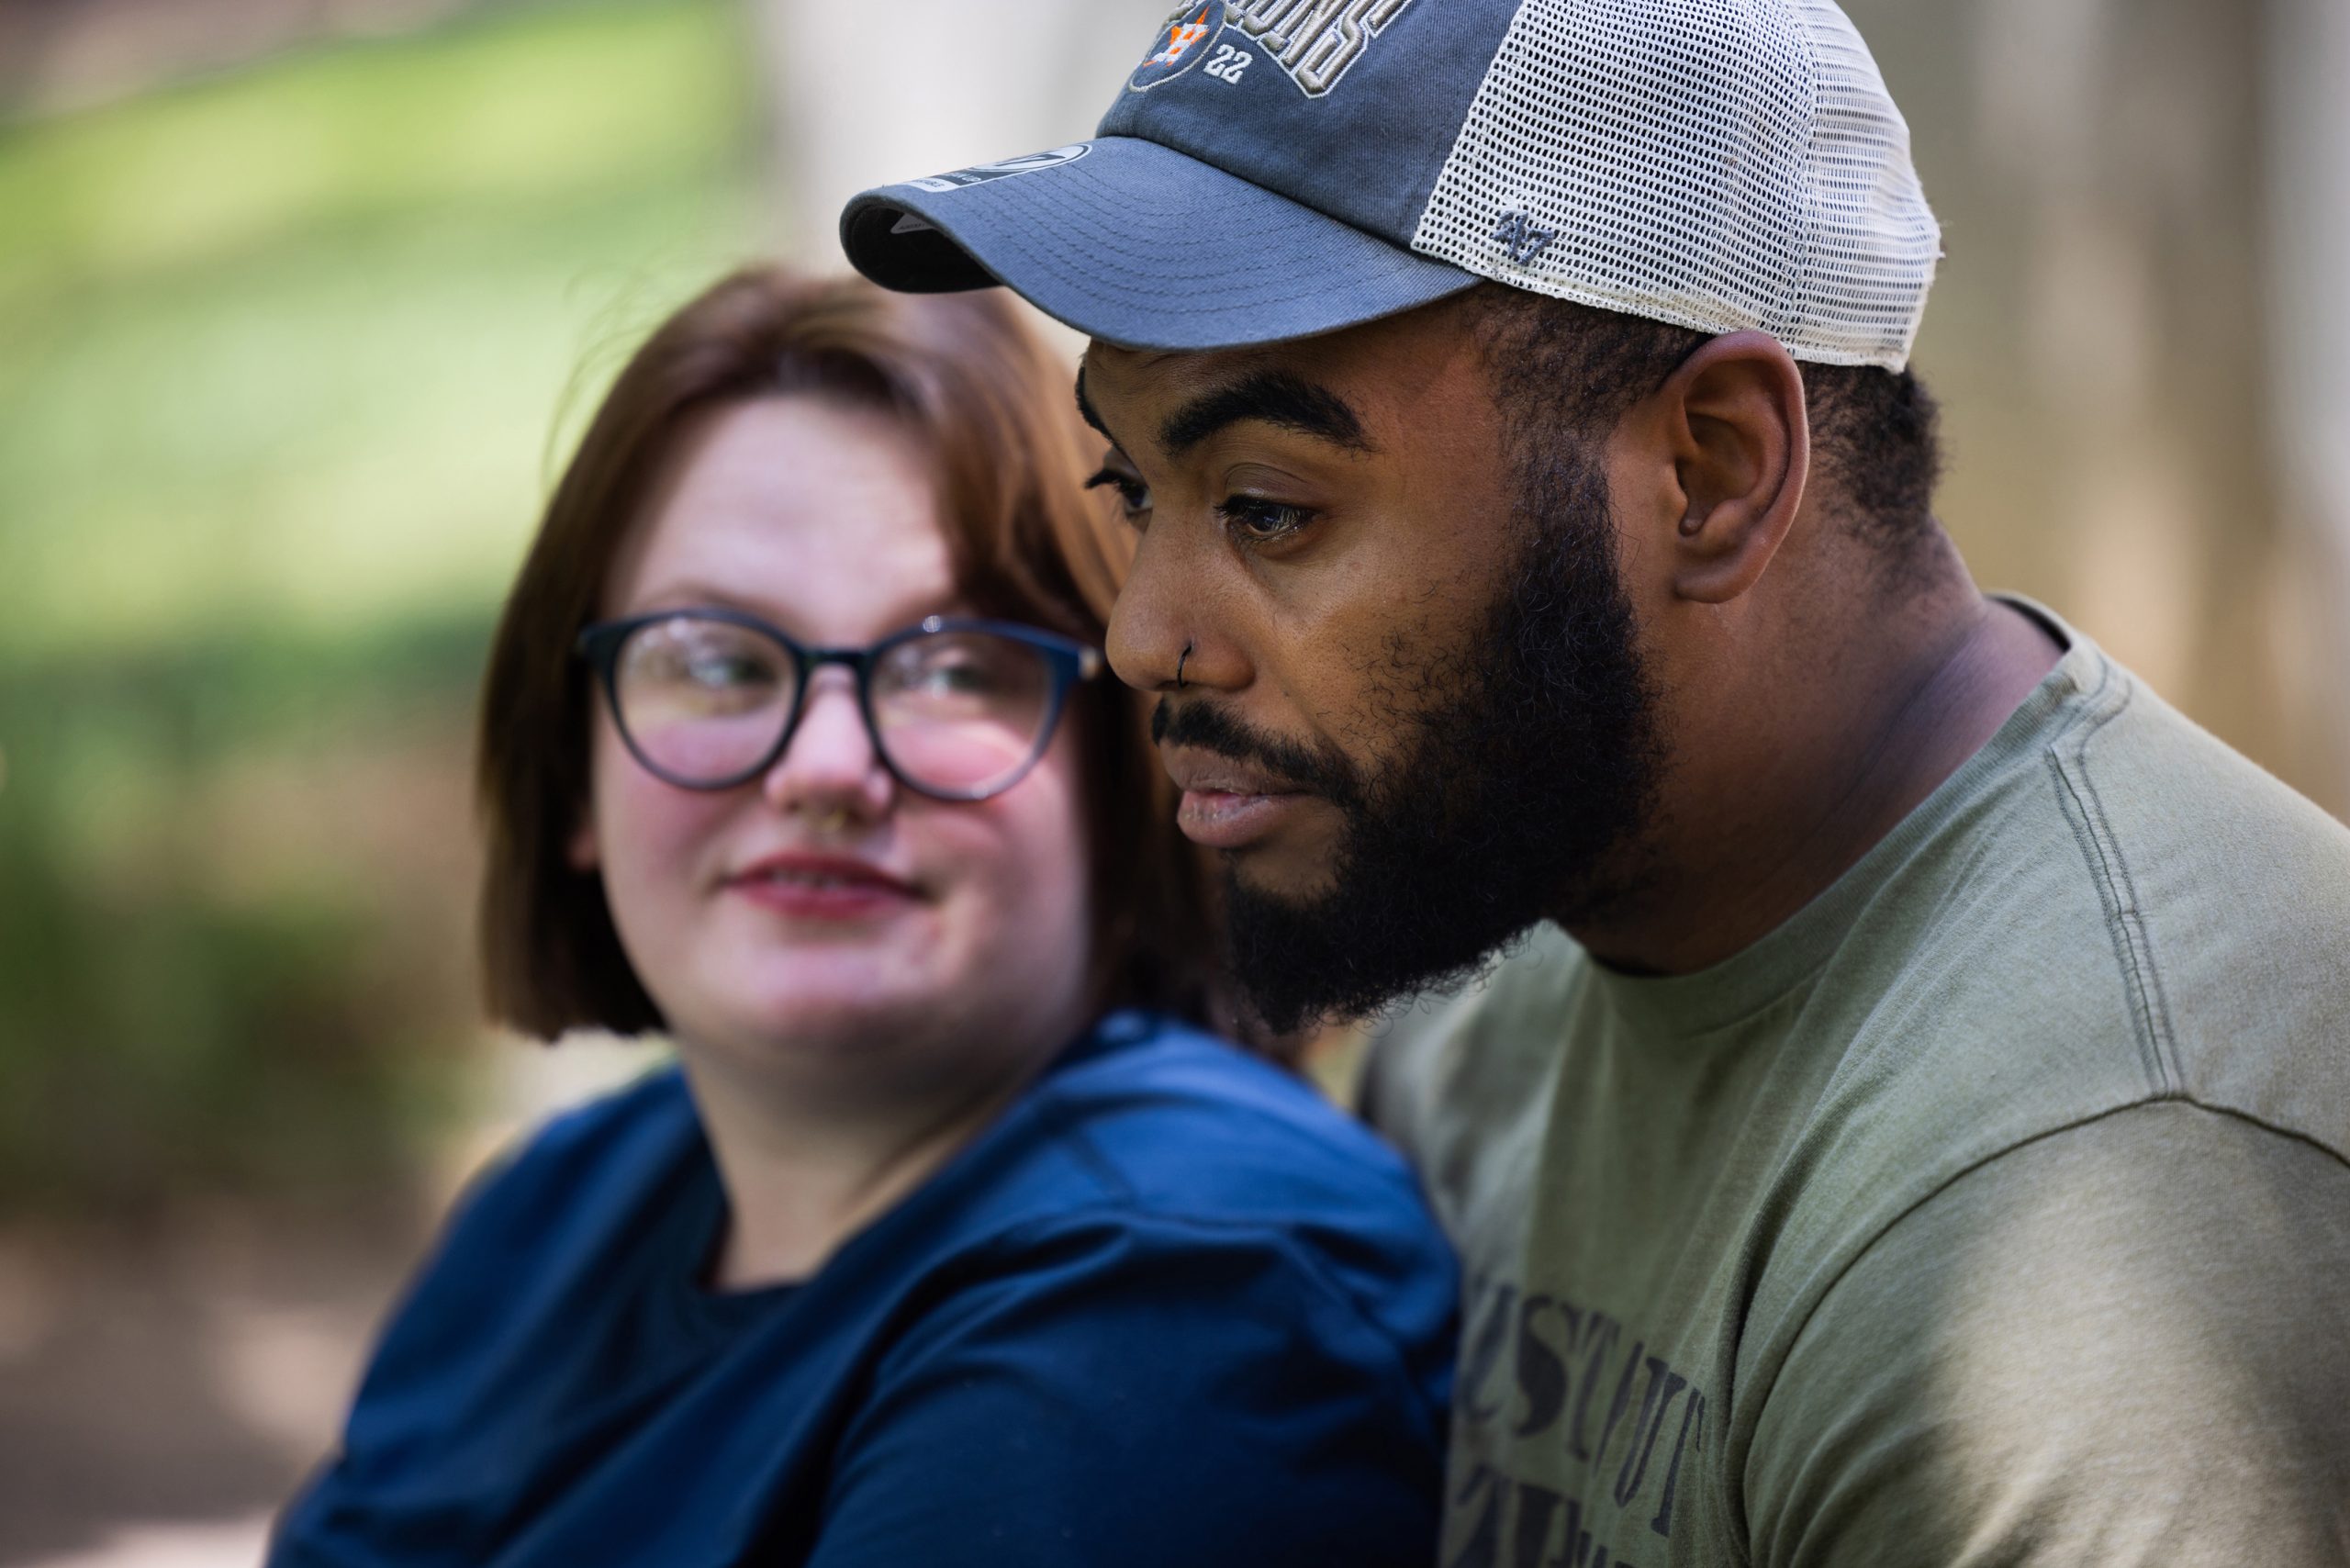 Aaron Morris, right, and his wife, Cyra, pose for a portrait outside their home in Jefferson City, Mo., in August.